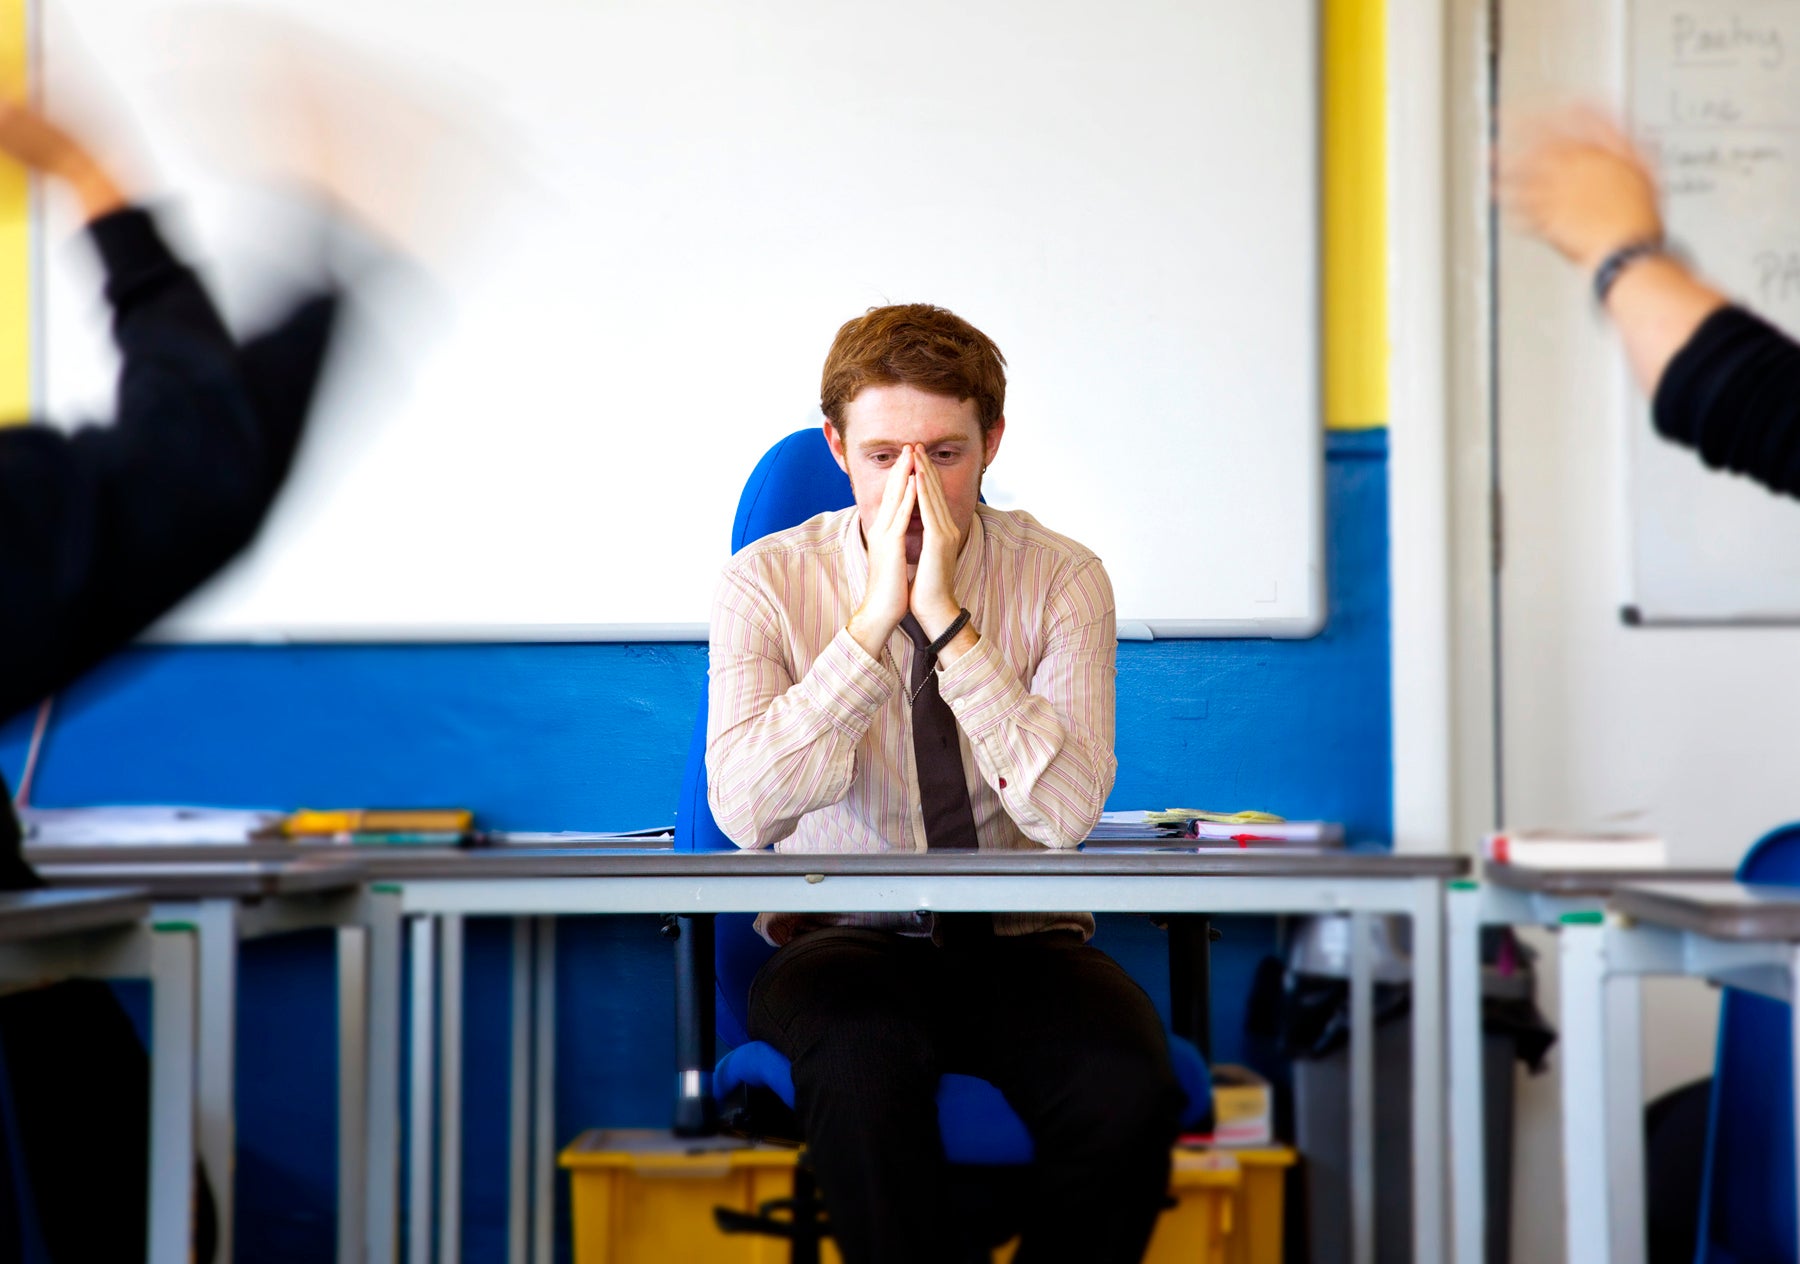 Behaviour and behaviour management are key contributors to mental health issues among teachers